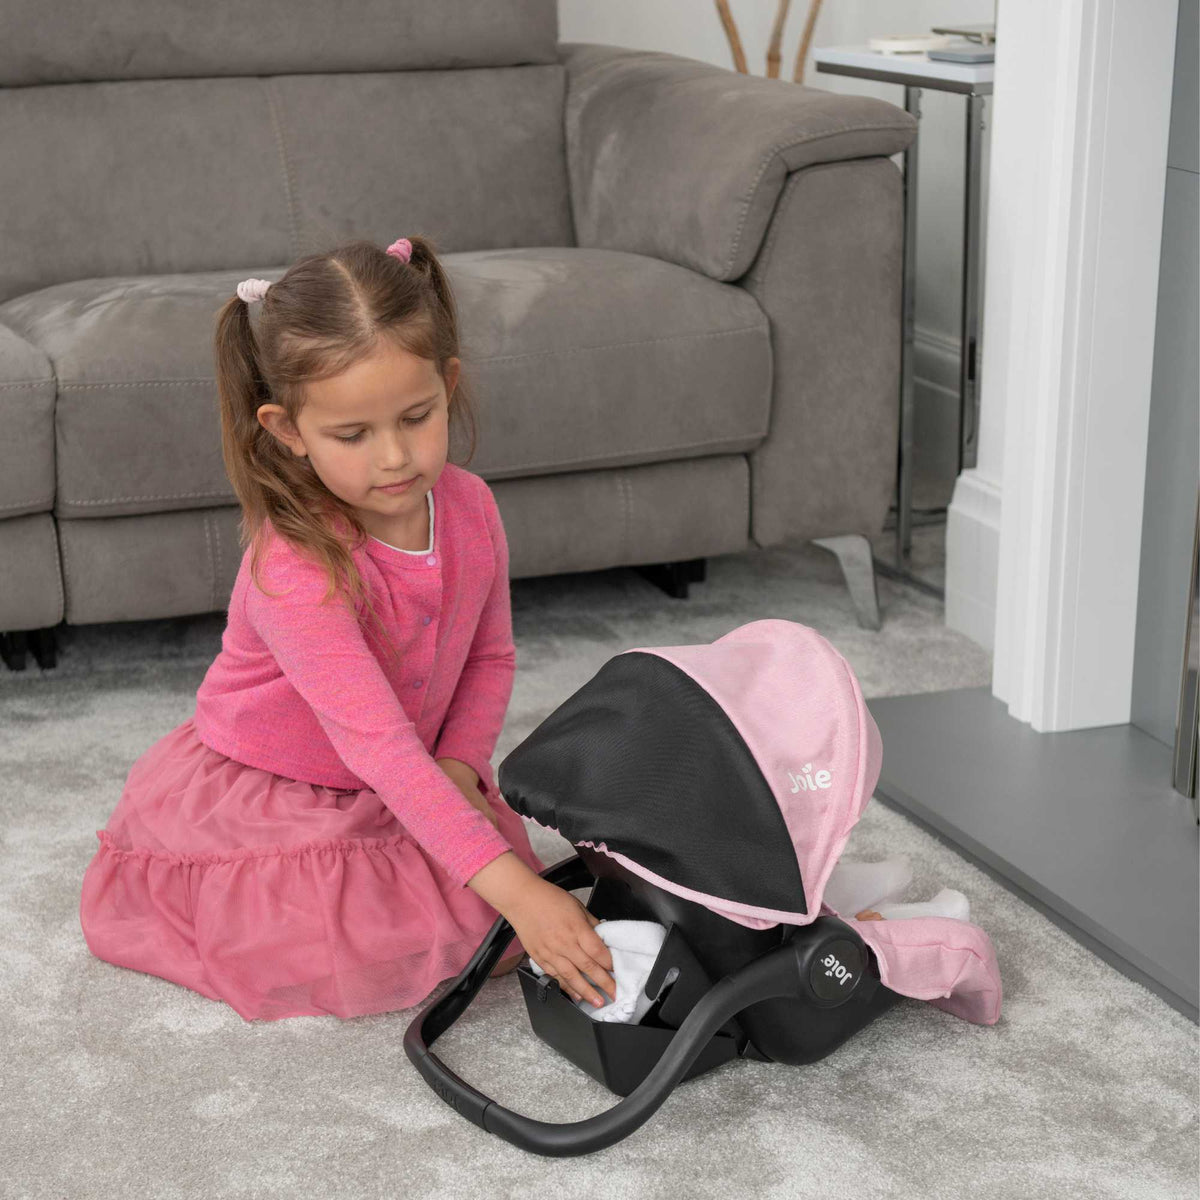 Joie I-Gemm Dolls Car Seat in pink and black, featuring a realistic design with secure harness, padded interior, and carry handle, perfect for children to safely transport their dolls during playtime